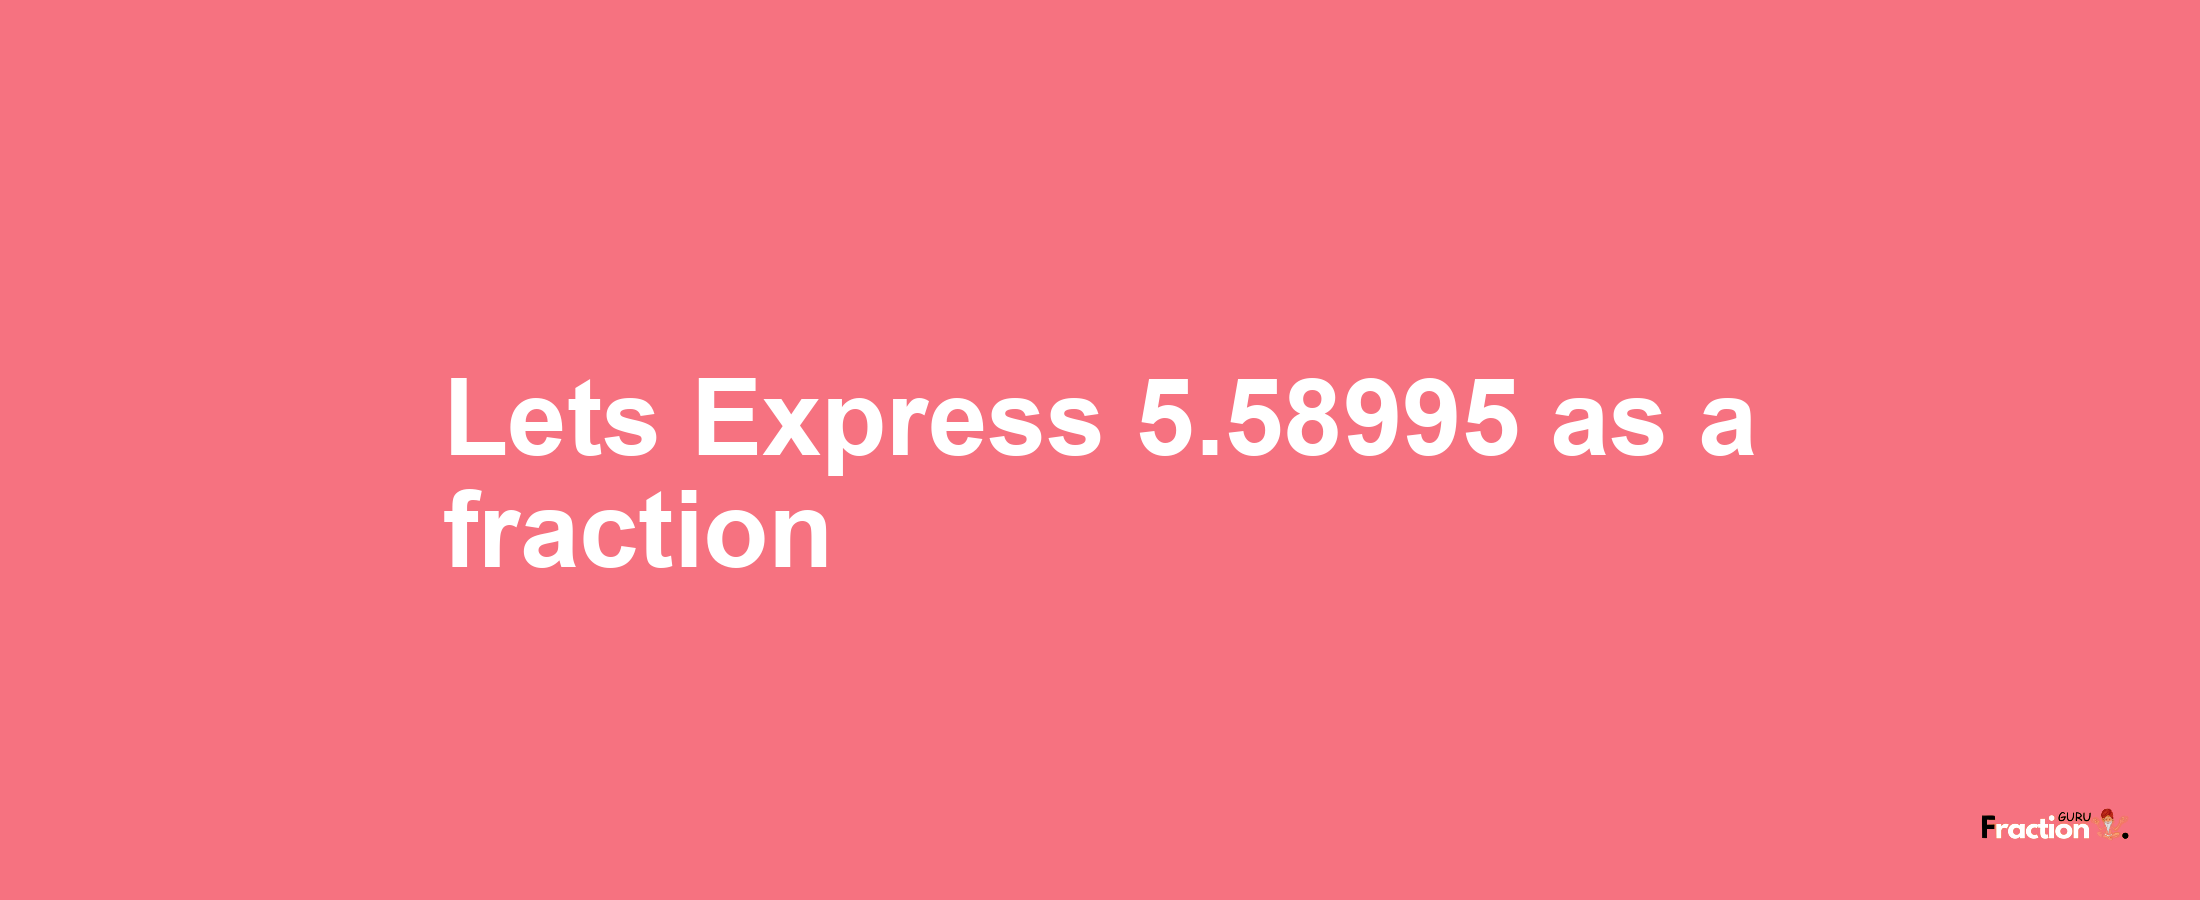 Lets Express 5.58995 as afraction